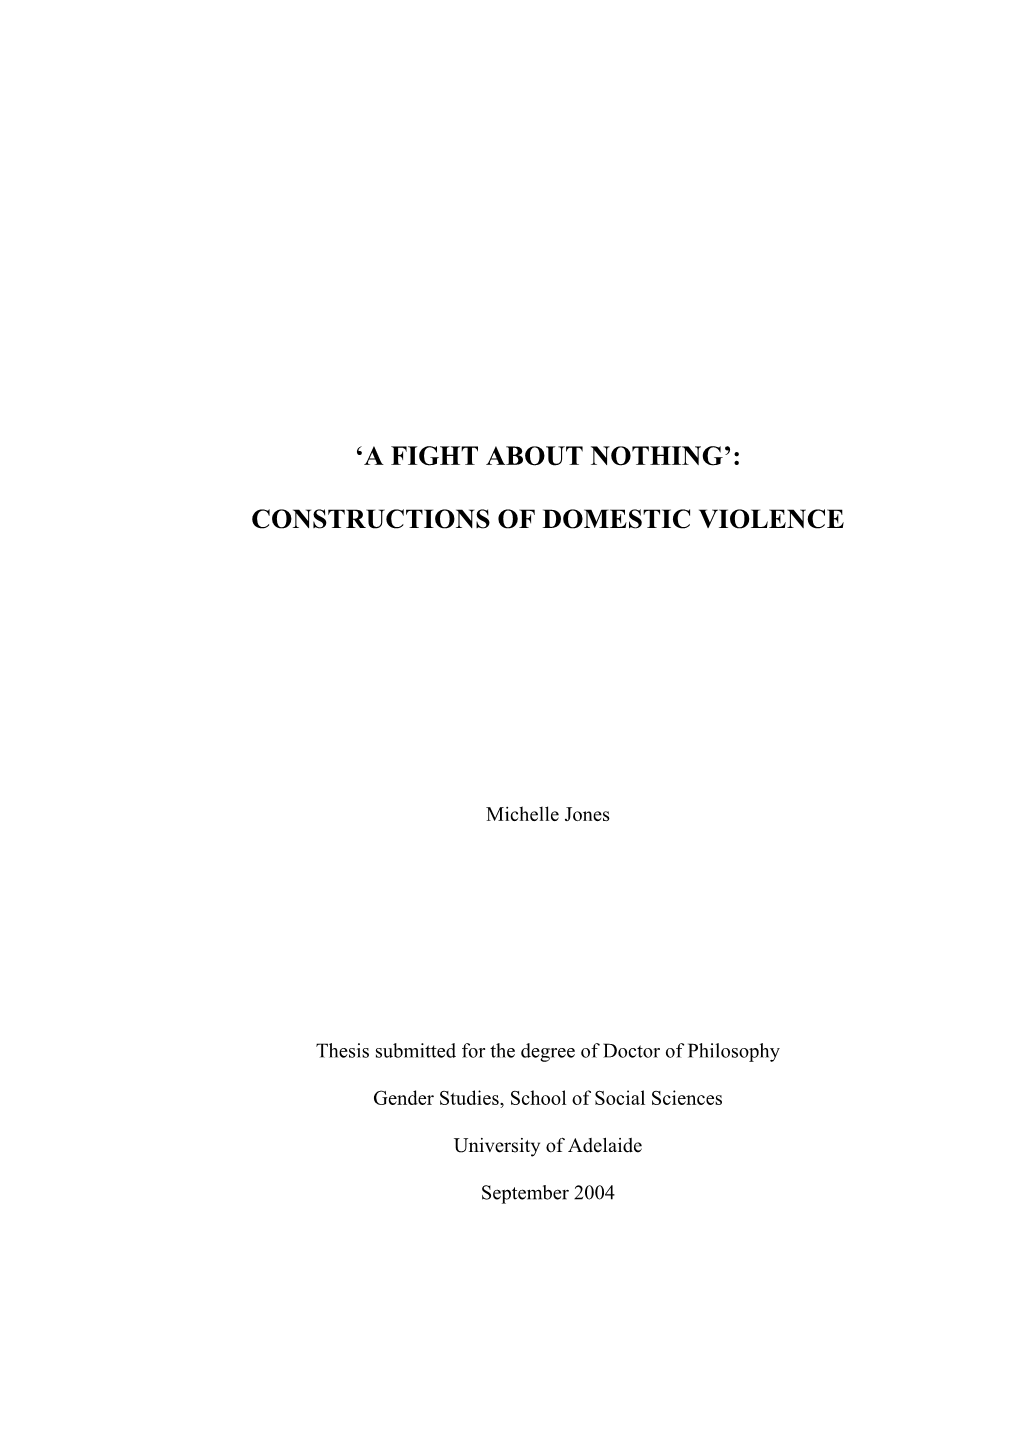 Constructions of Domestic Violence